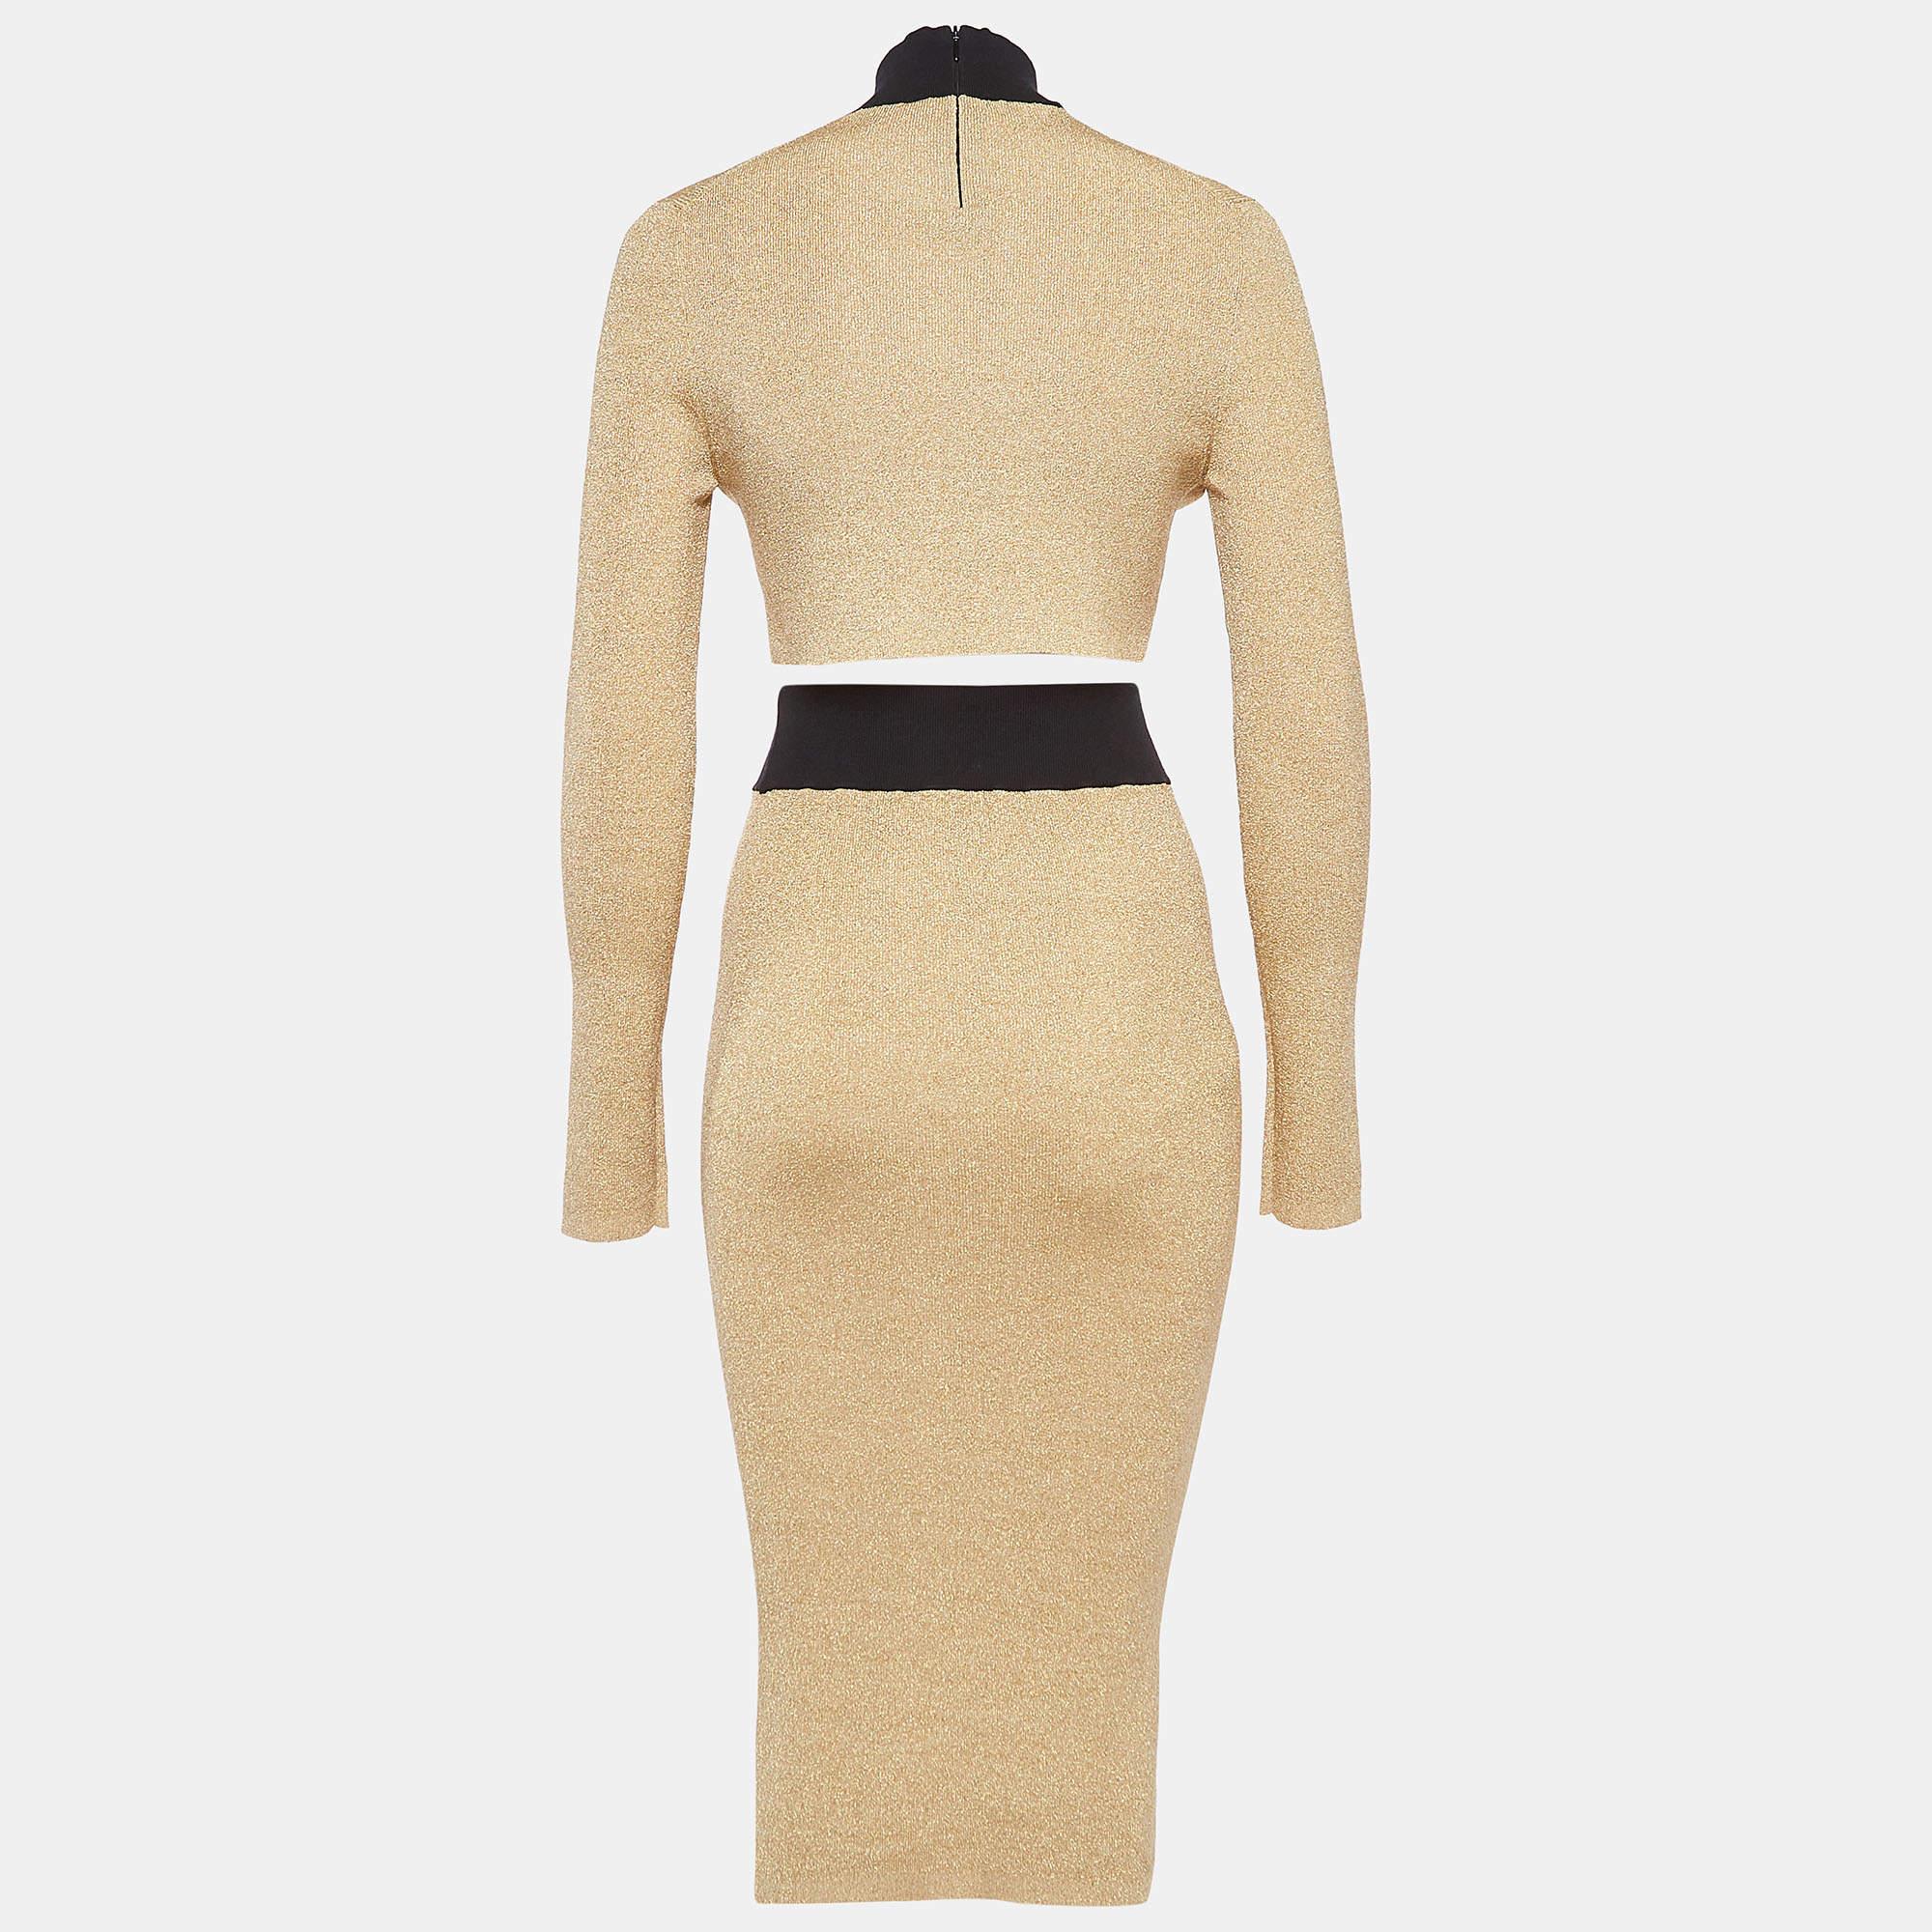 This exquisite Prada ensemble exudes opulence with its gold logo intarsia lamé knit fabric. The crop top features a sleek silhouette, while the skirt boasts a flattering fit. Together, they epitomize sophistication and luxury, perfect for making a